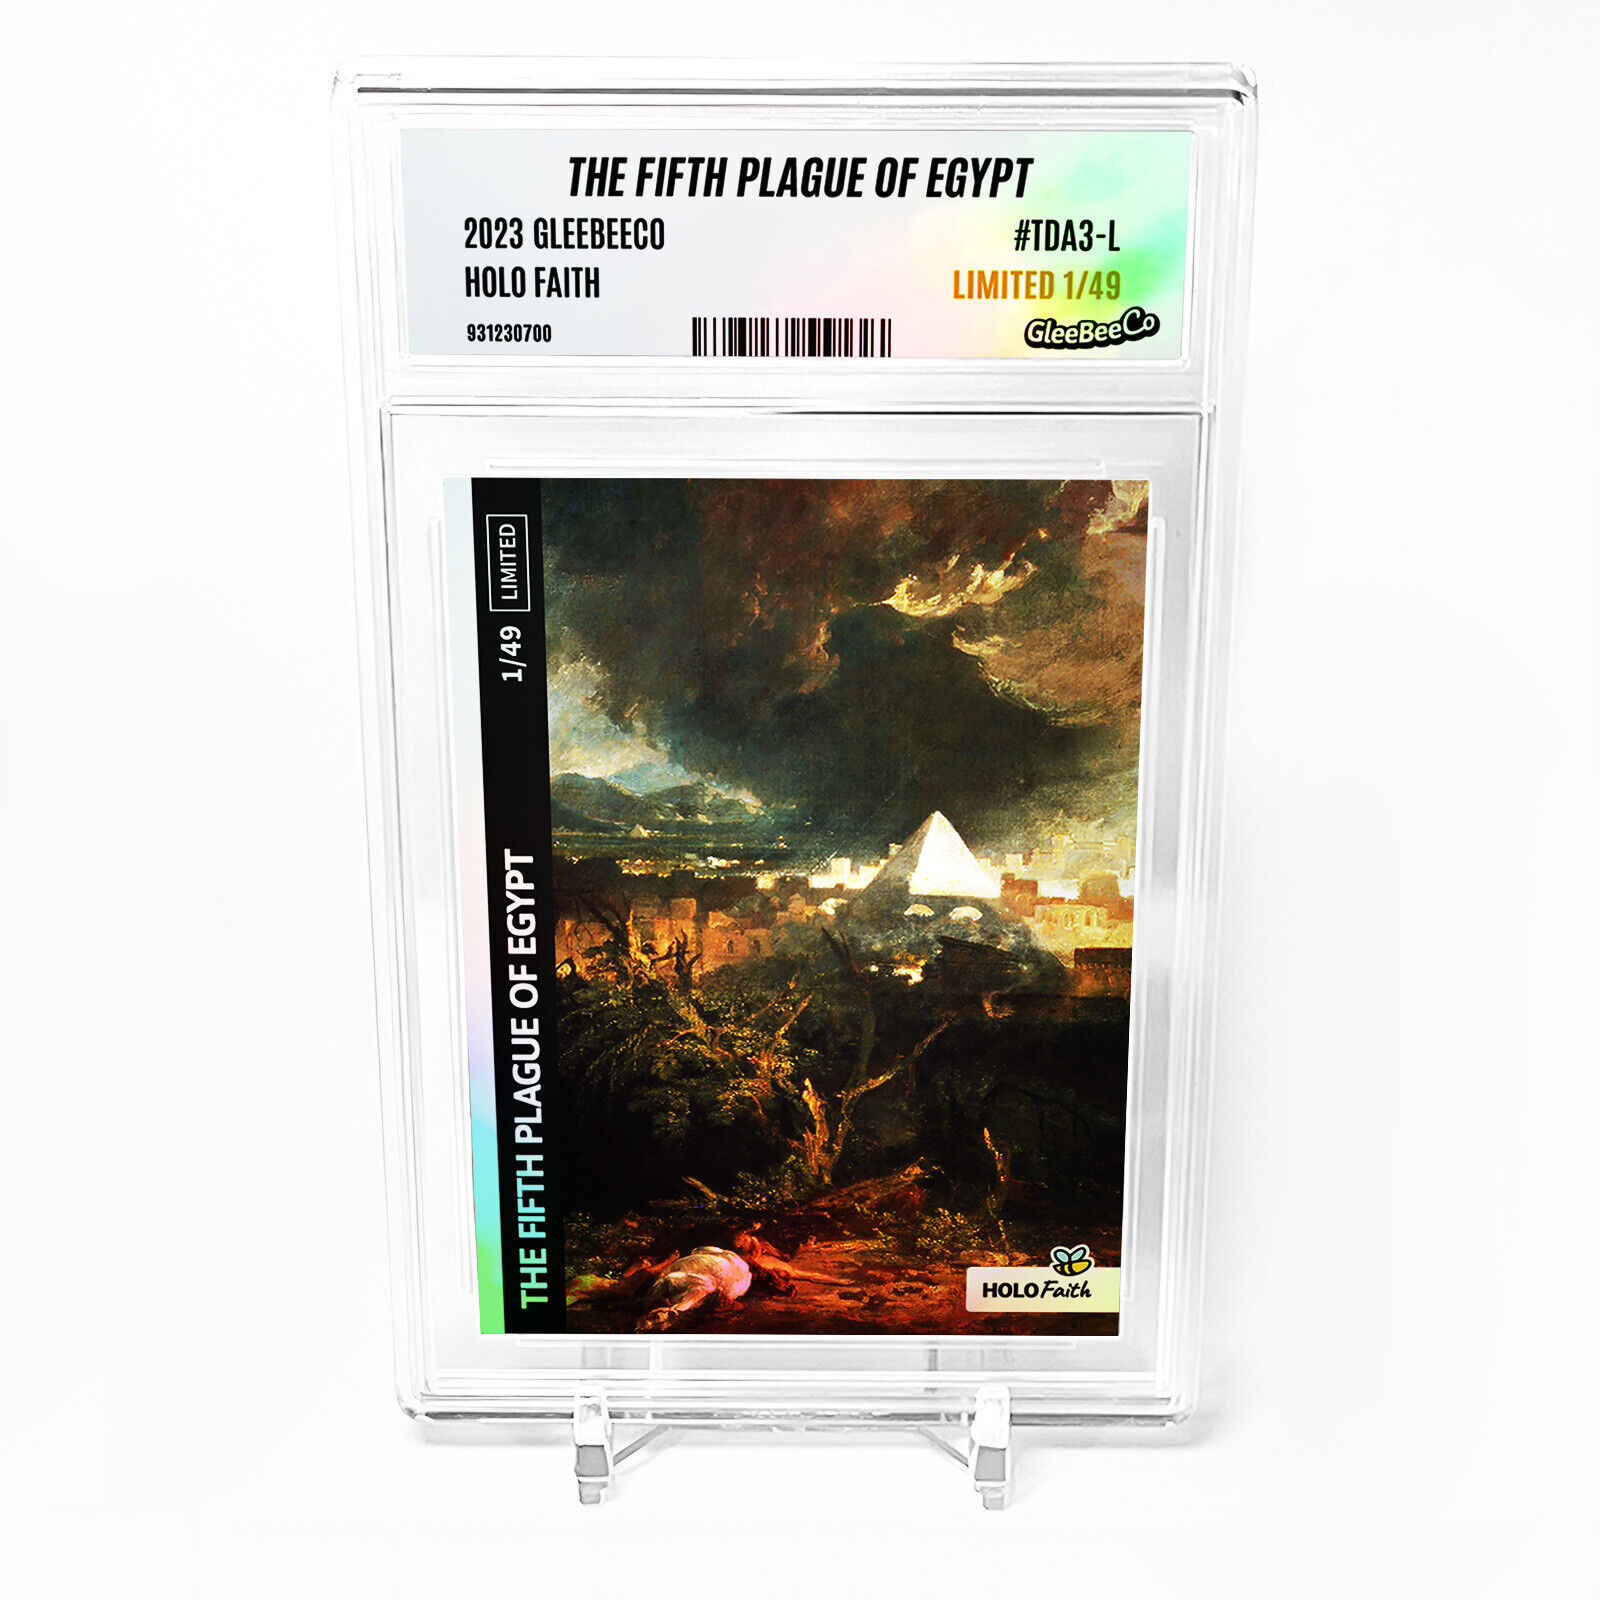 THE FIFTH PLAGUE OF EGYPT Card 2023 GleeBeeCo J. M. W. Turner Holo #TDA3-L /49